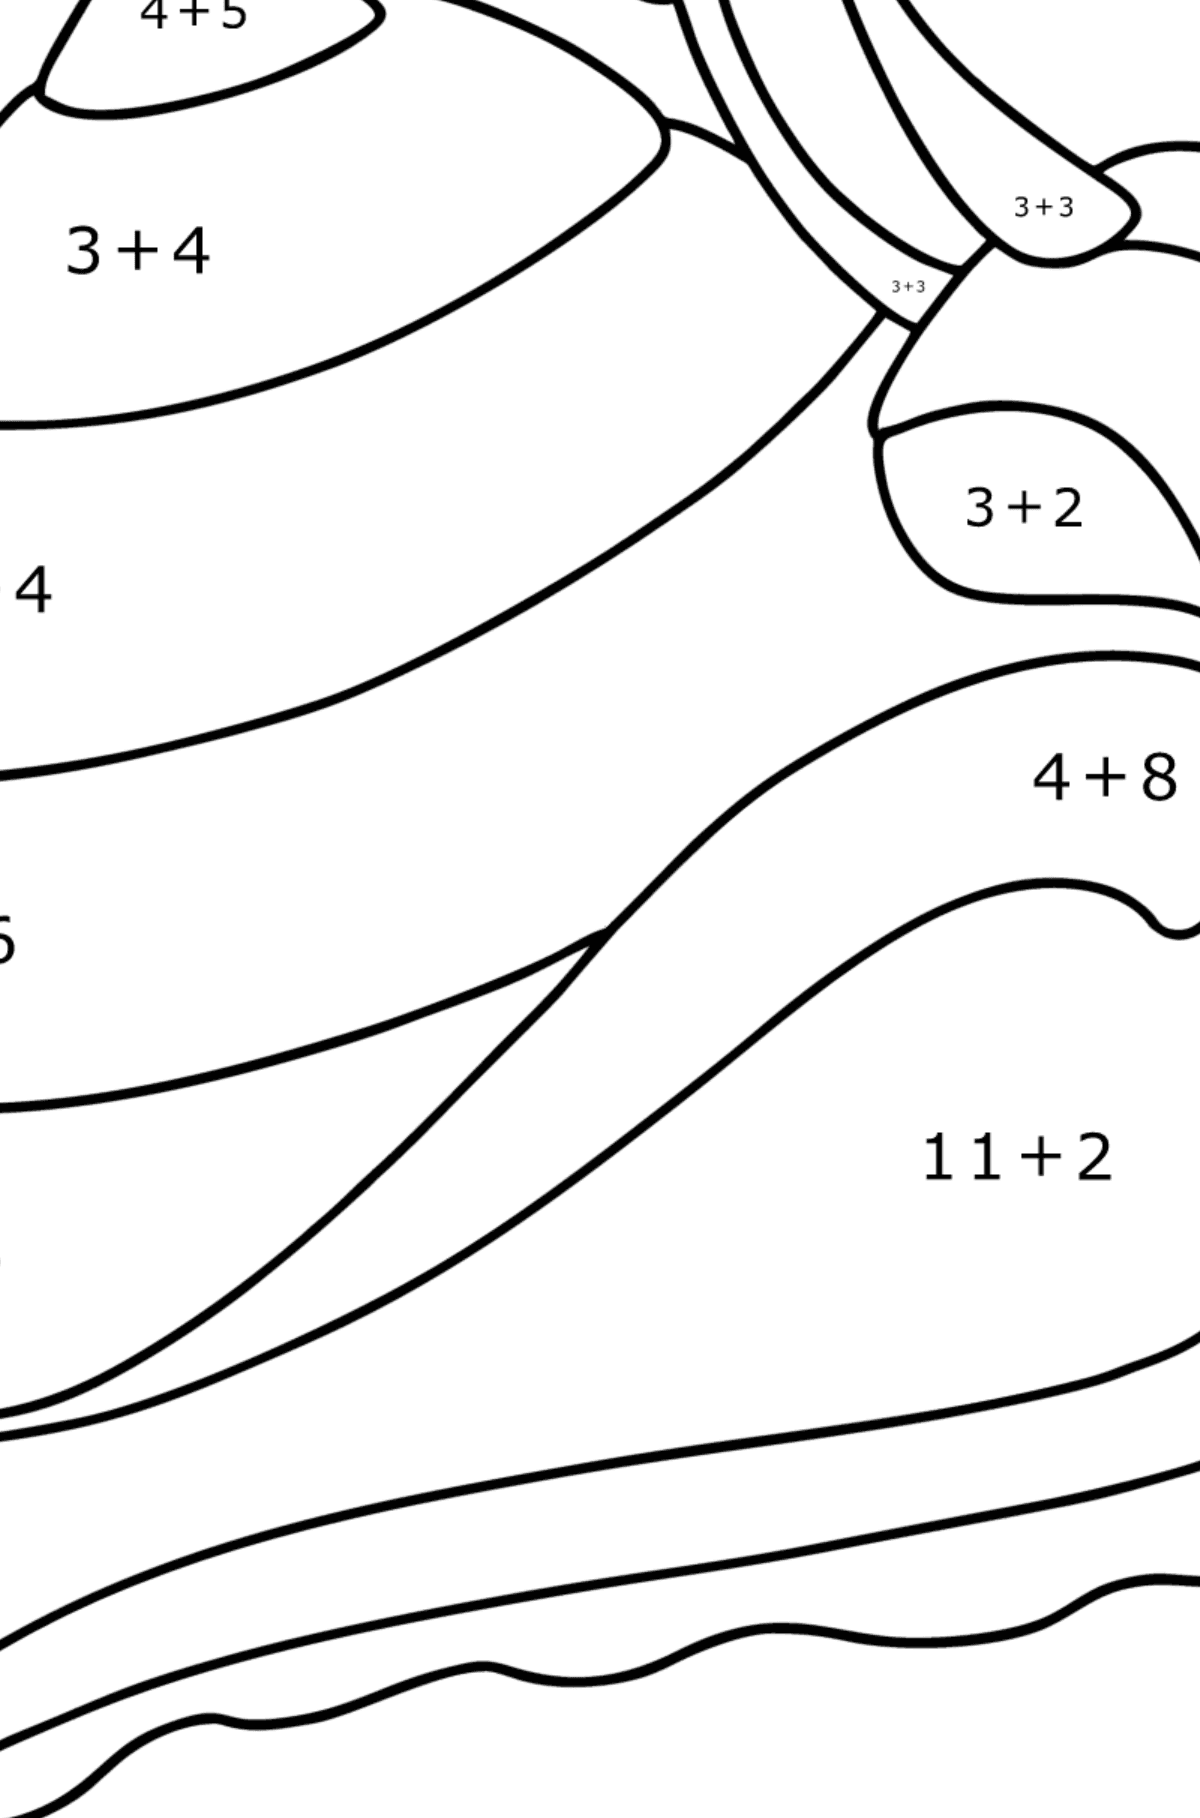 Snail coloring page - Math Coloring - Addition for Kids